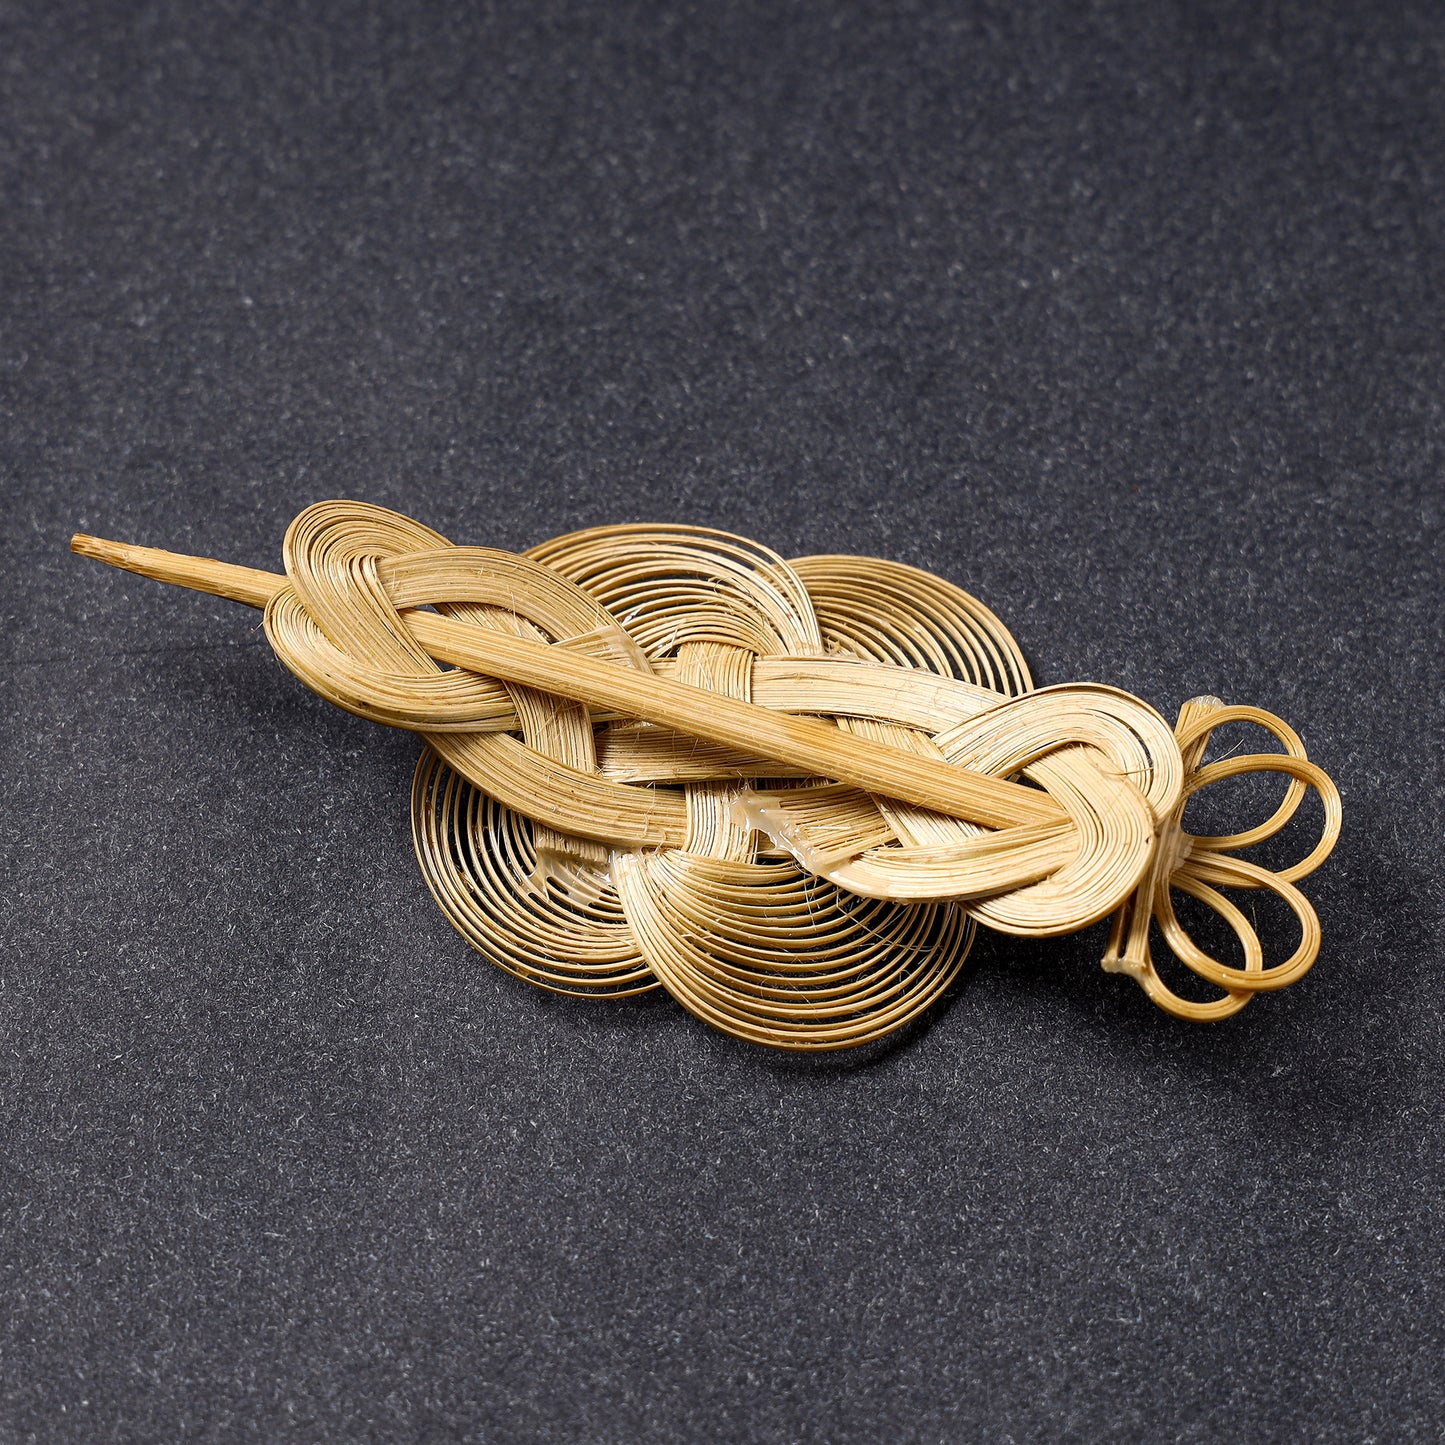 Handcrafted Bamboo Hair Clip